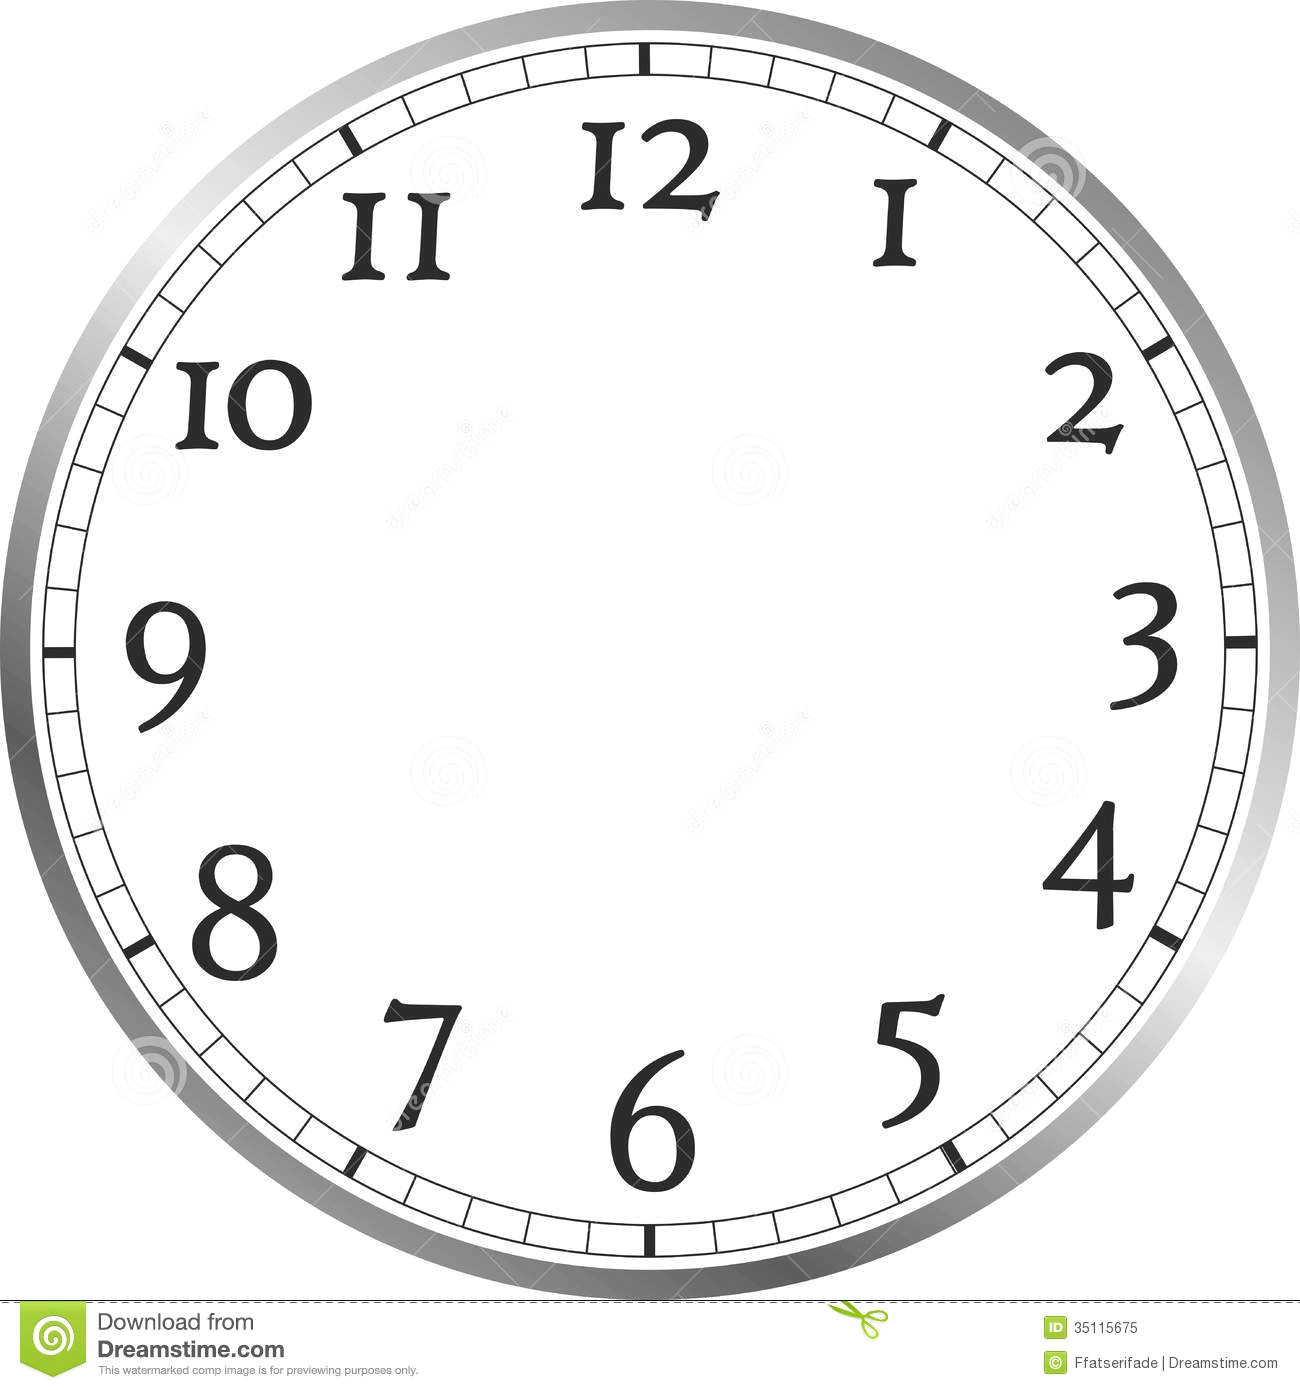 Drawings Of Clocks without Hands Free Clock without Hands Download Free Clip Art Free Clip Art On